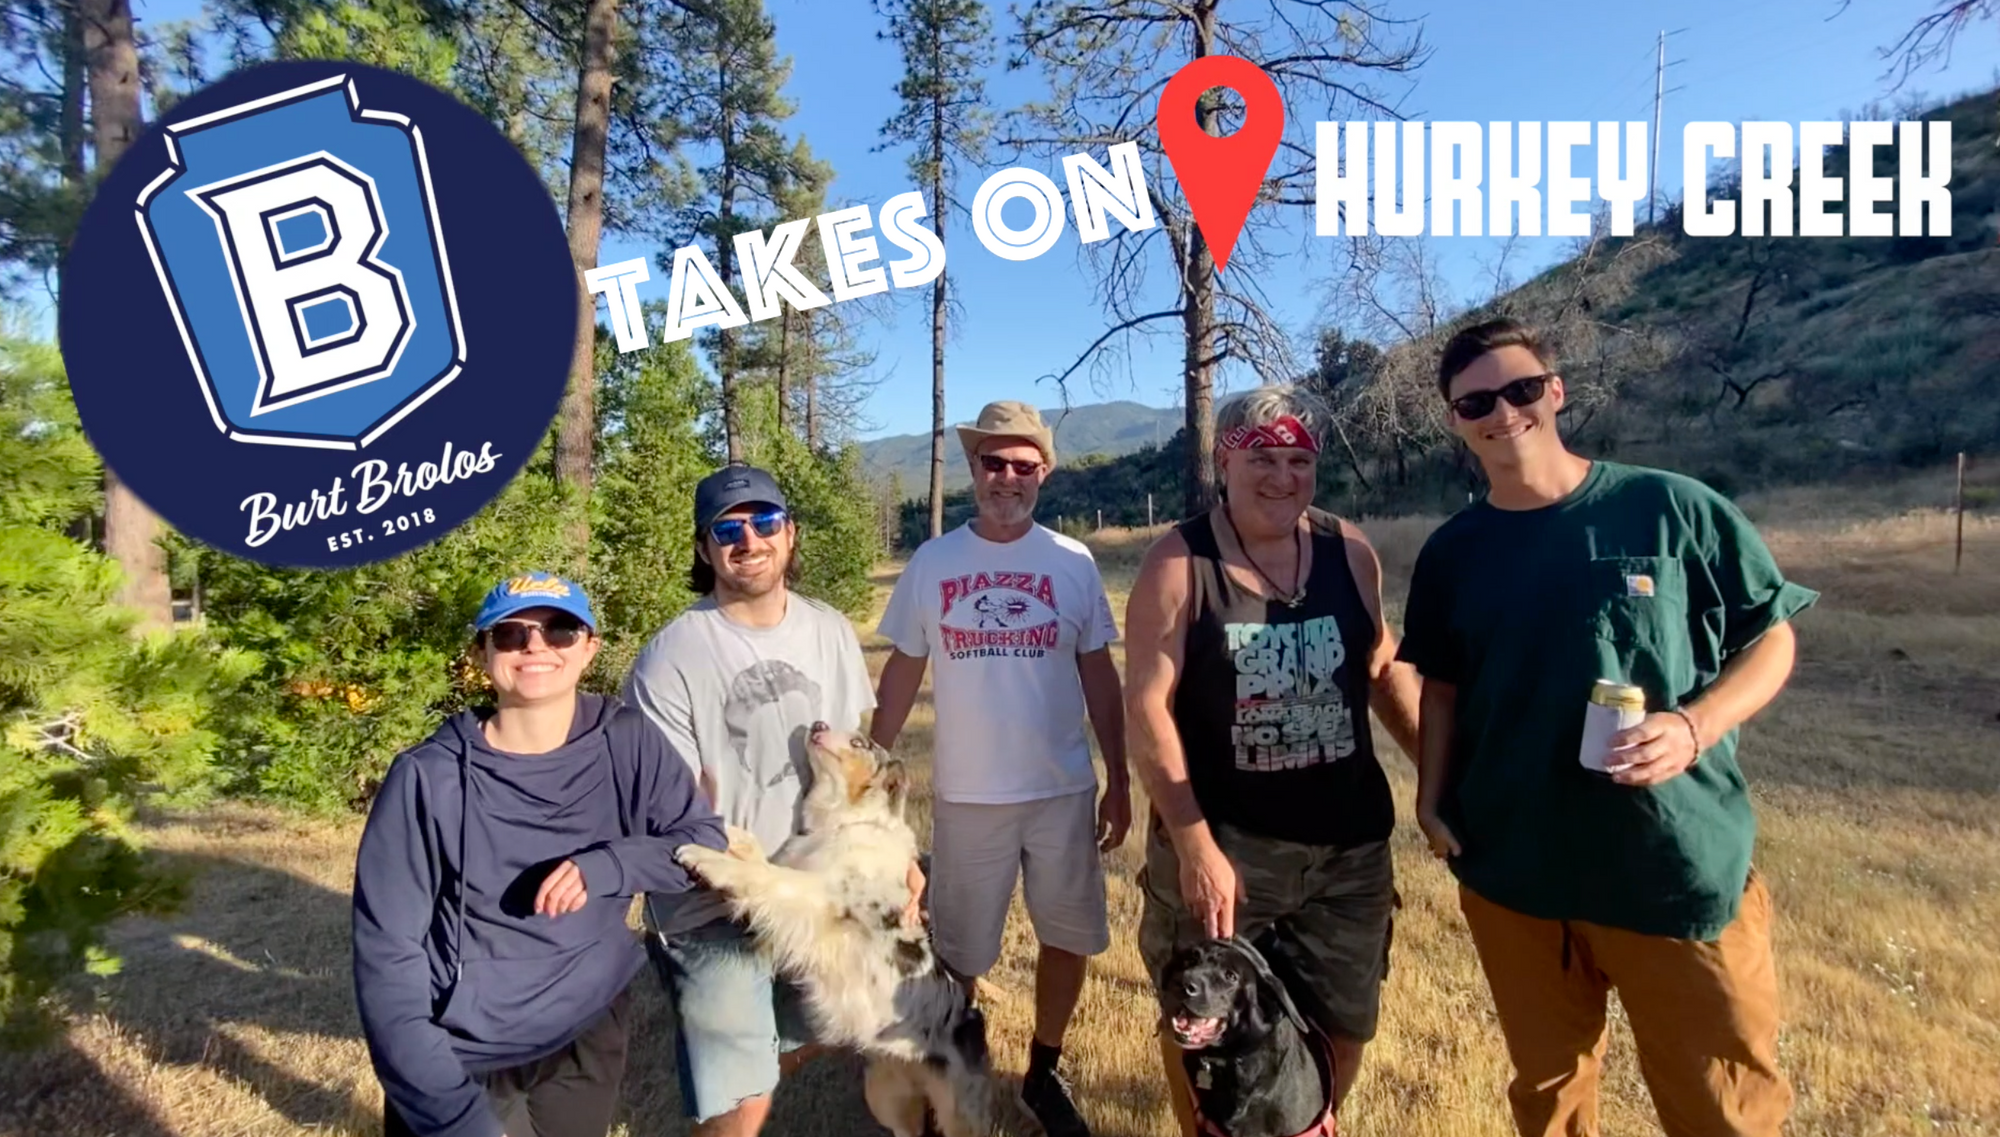 
                  Hurkey Creek Camping Father’s Day 2020
                